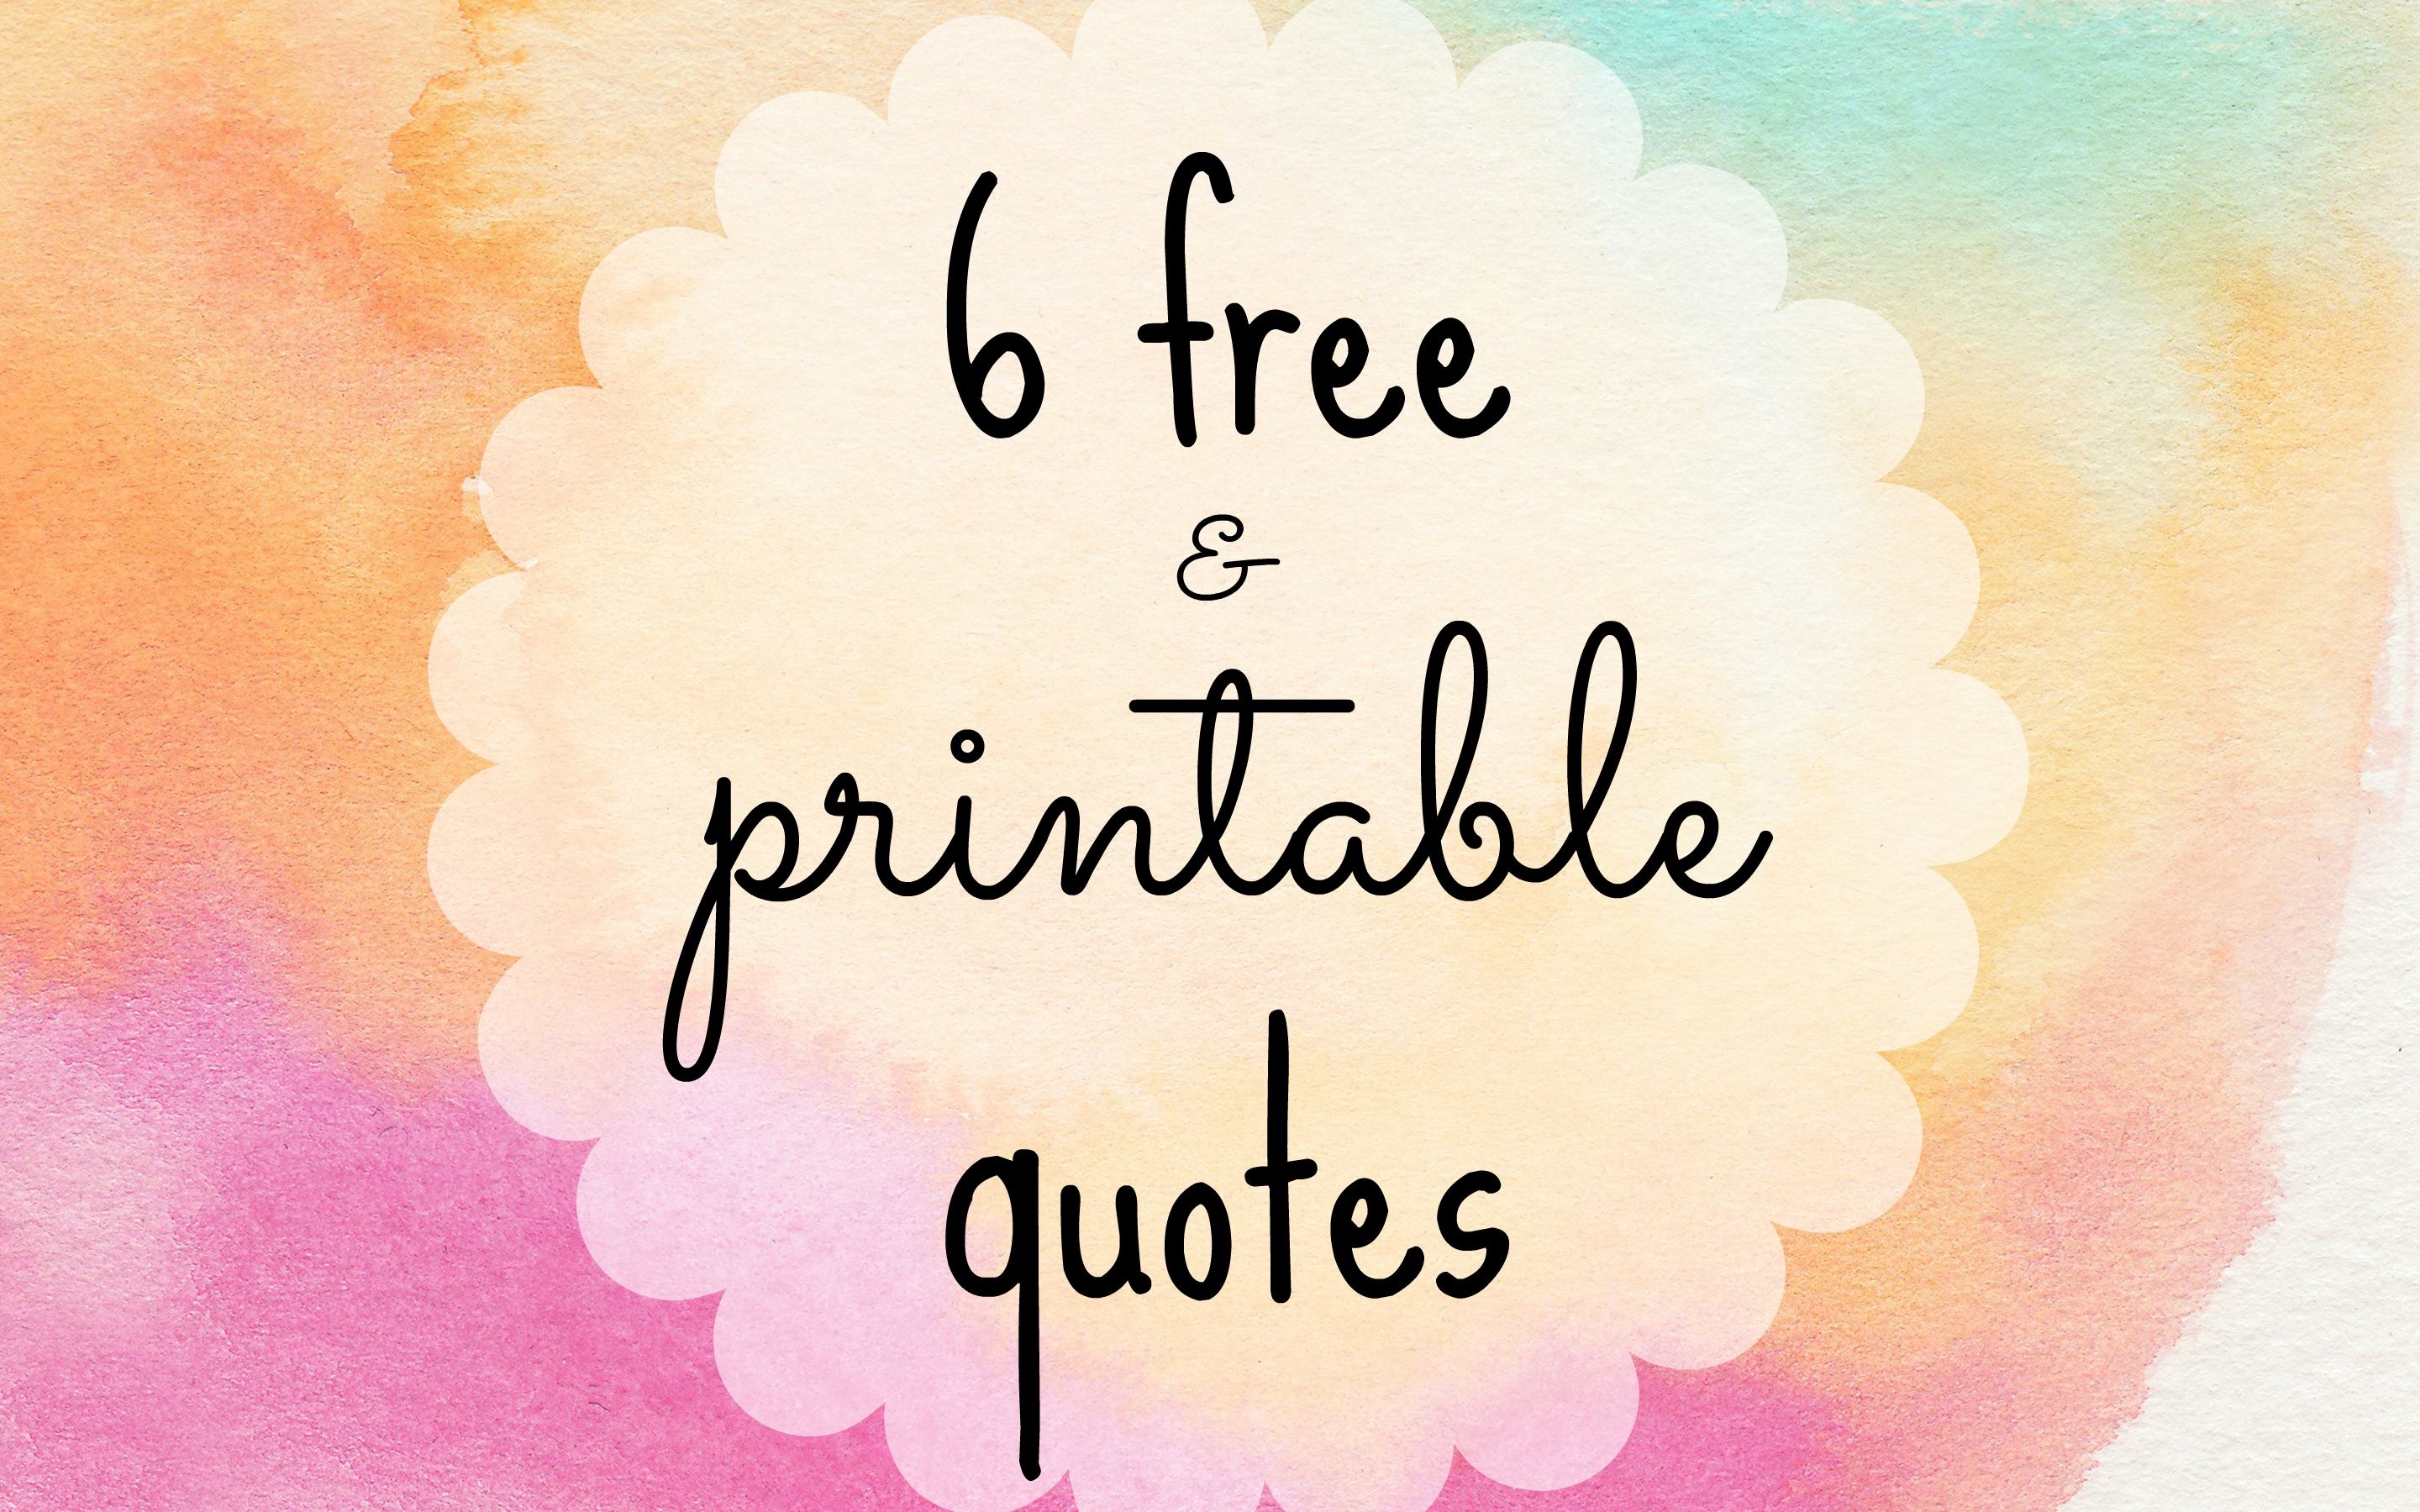 6 Free Printable Quotes To Dress Your Desk - Free Printable Quotes